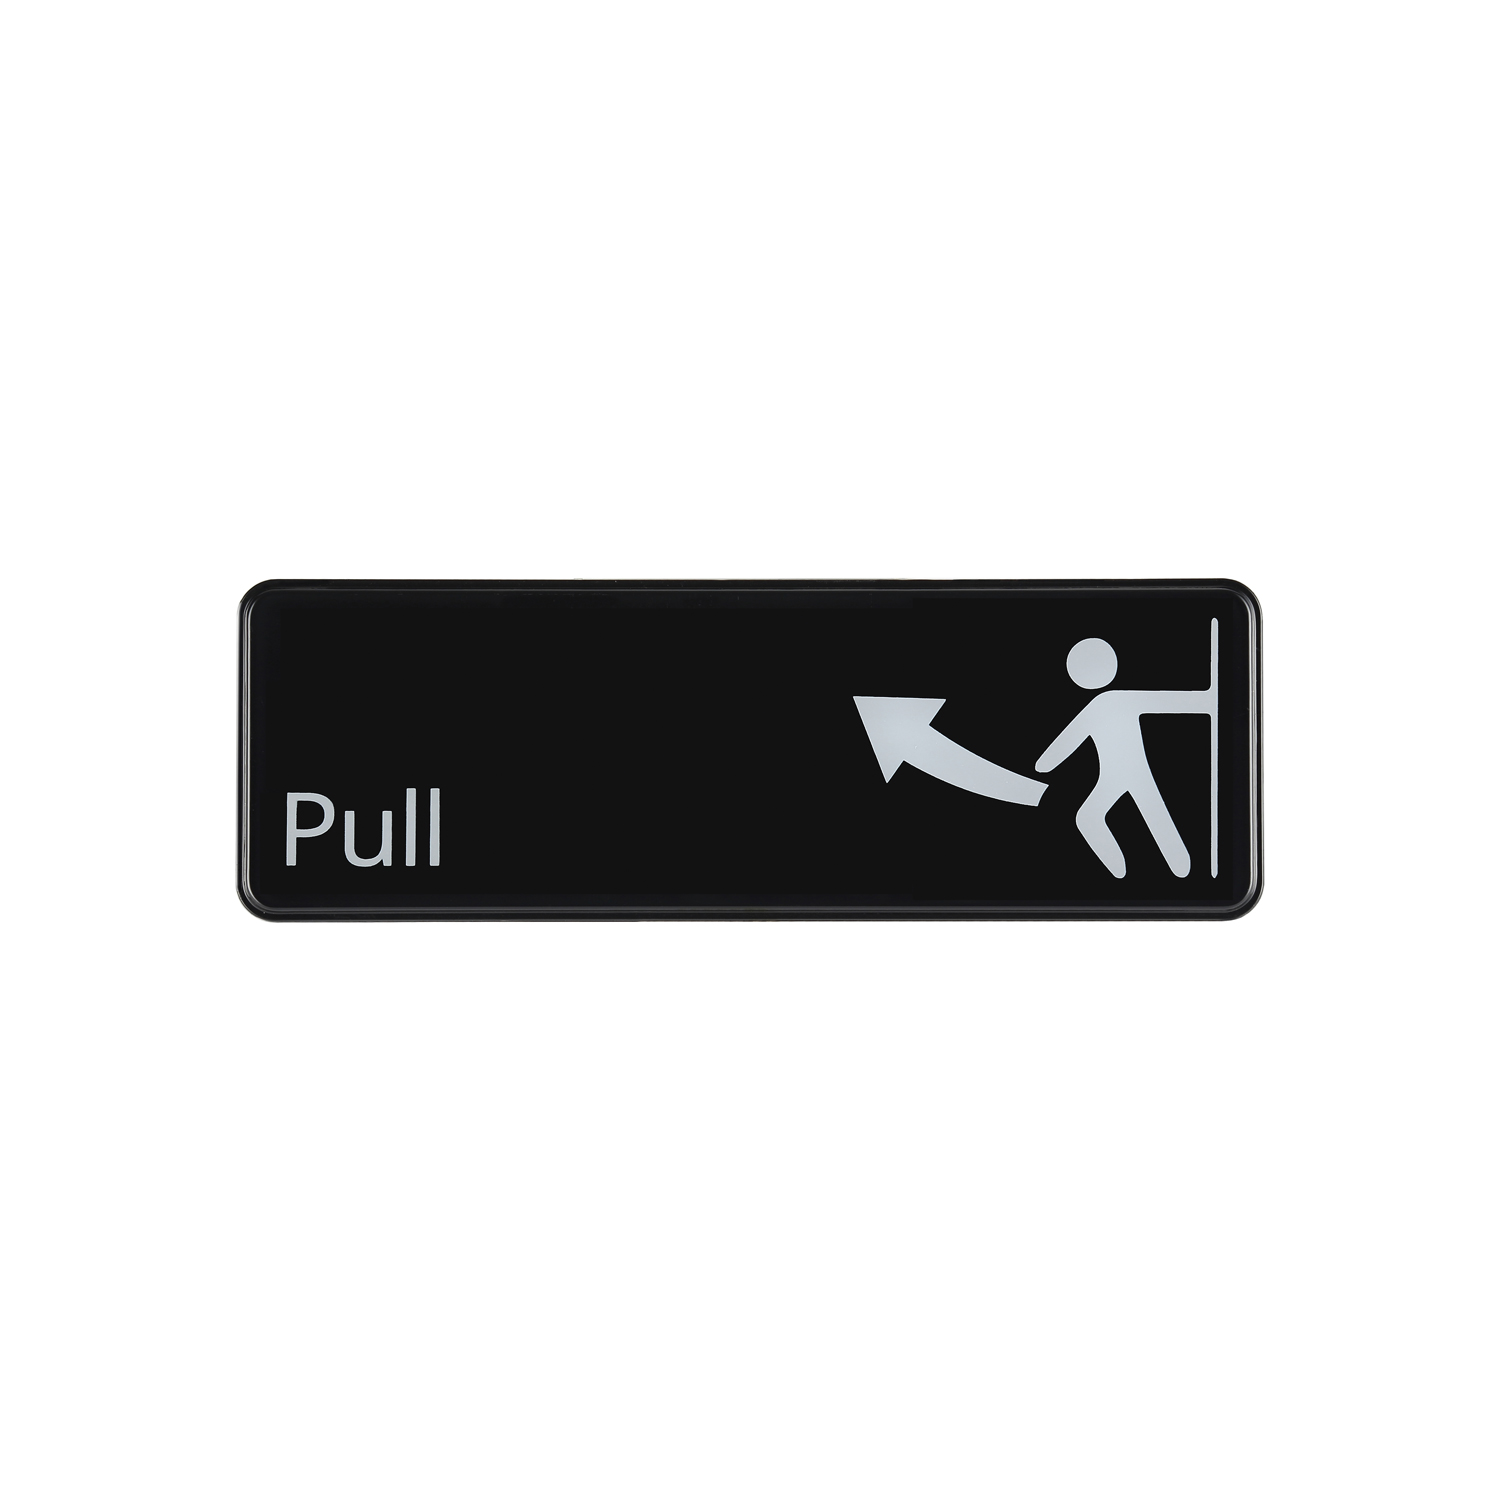 CAC China SCE3-PL02 Compliance Sign English "Pull" 9"x 3" H